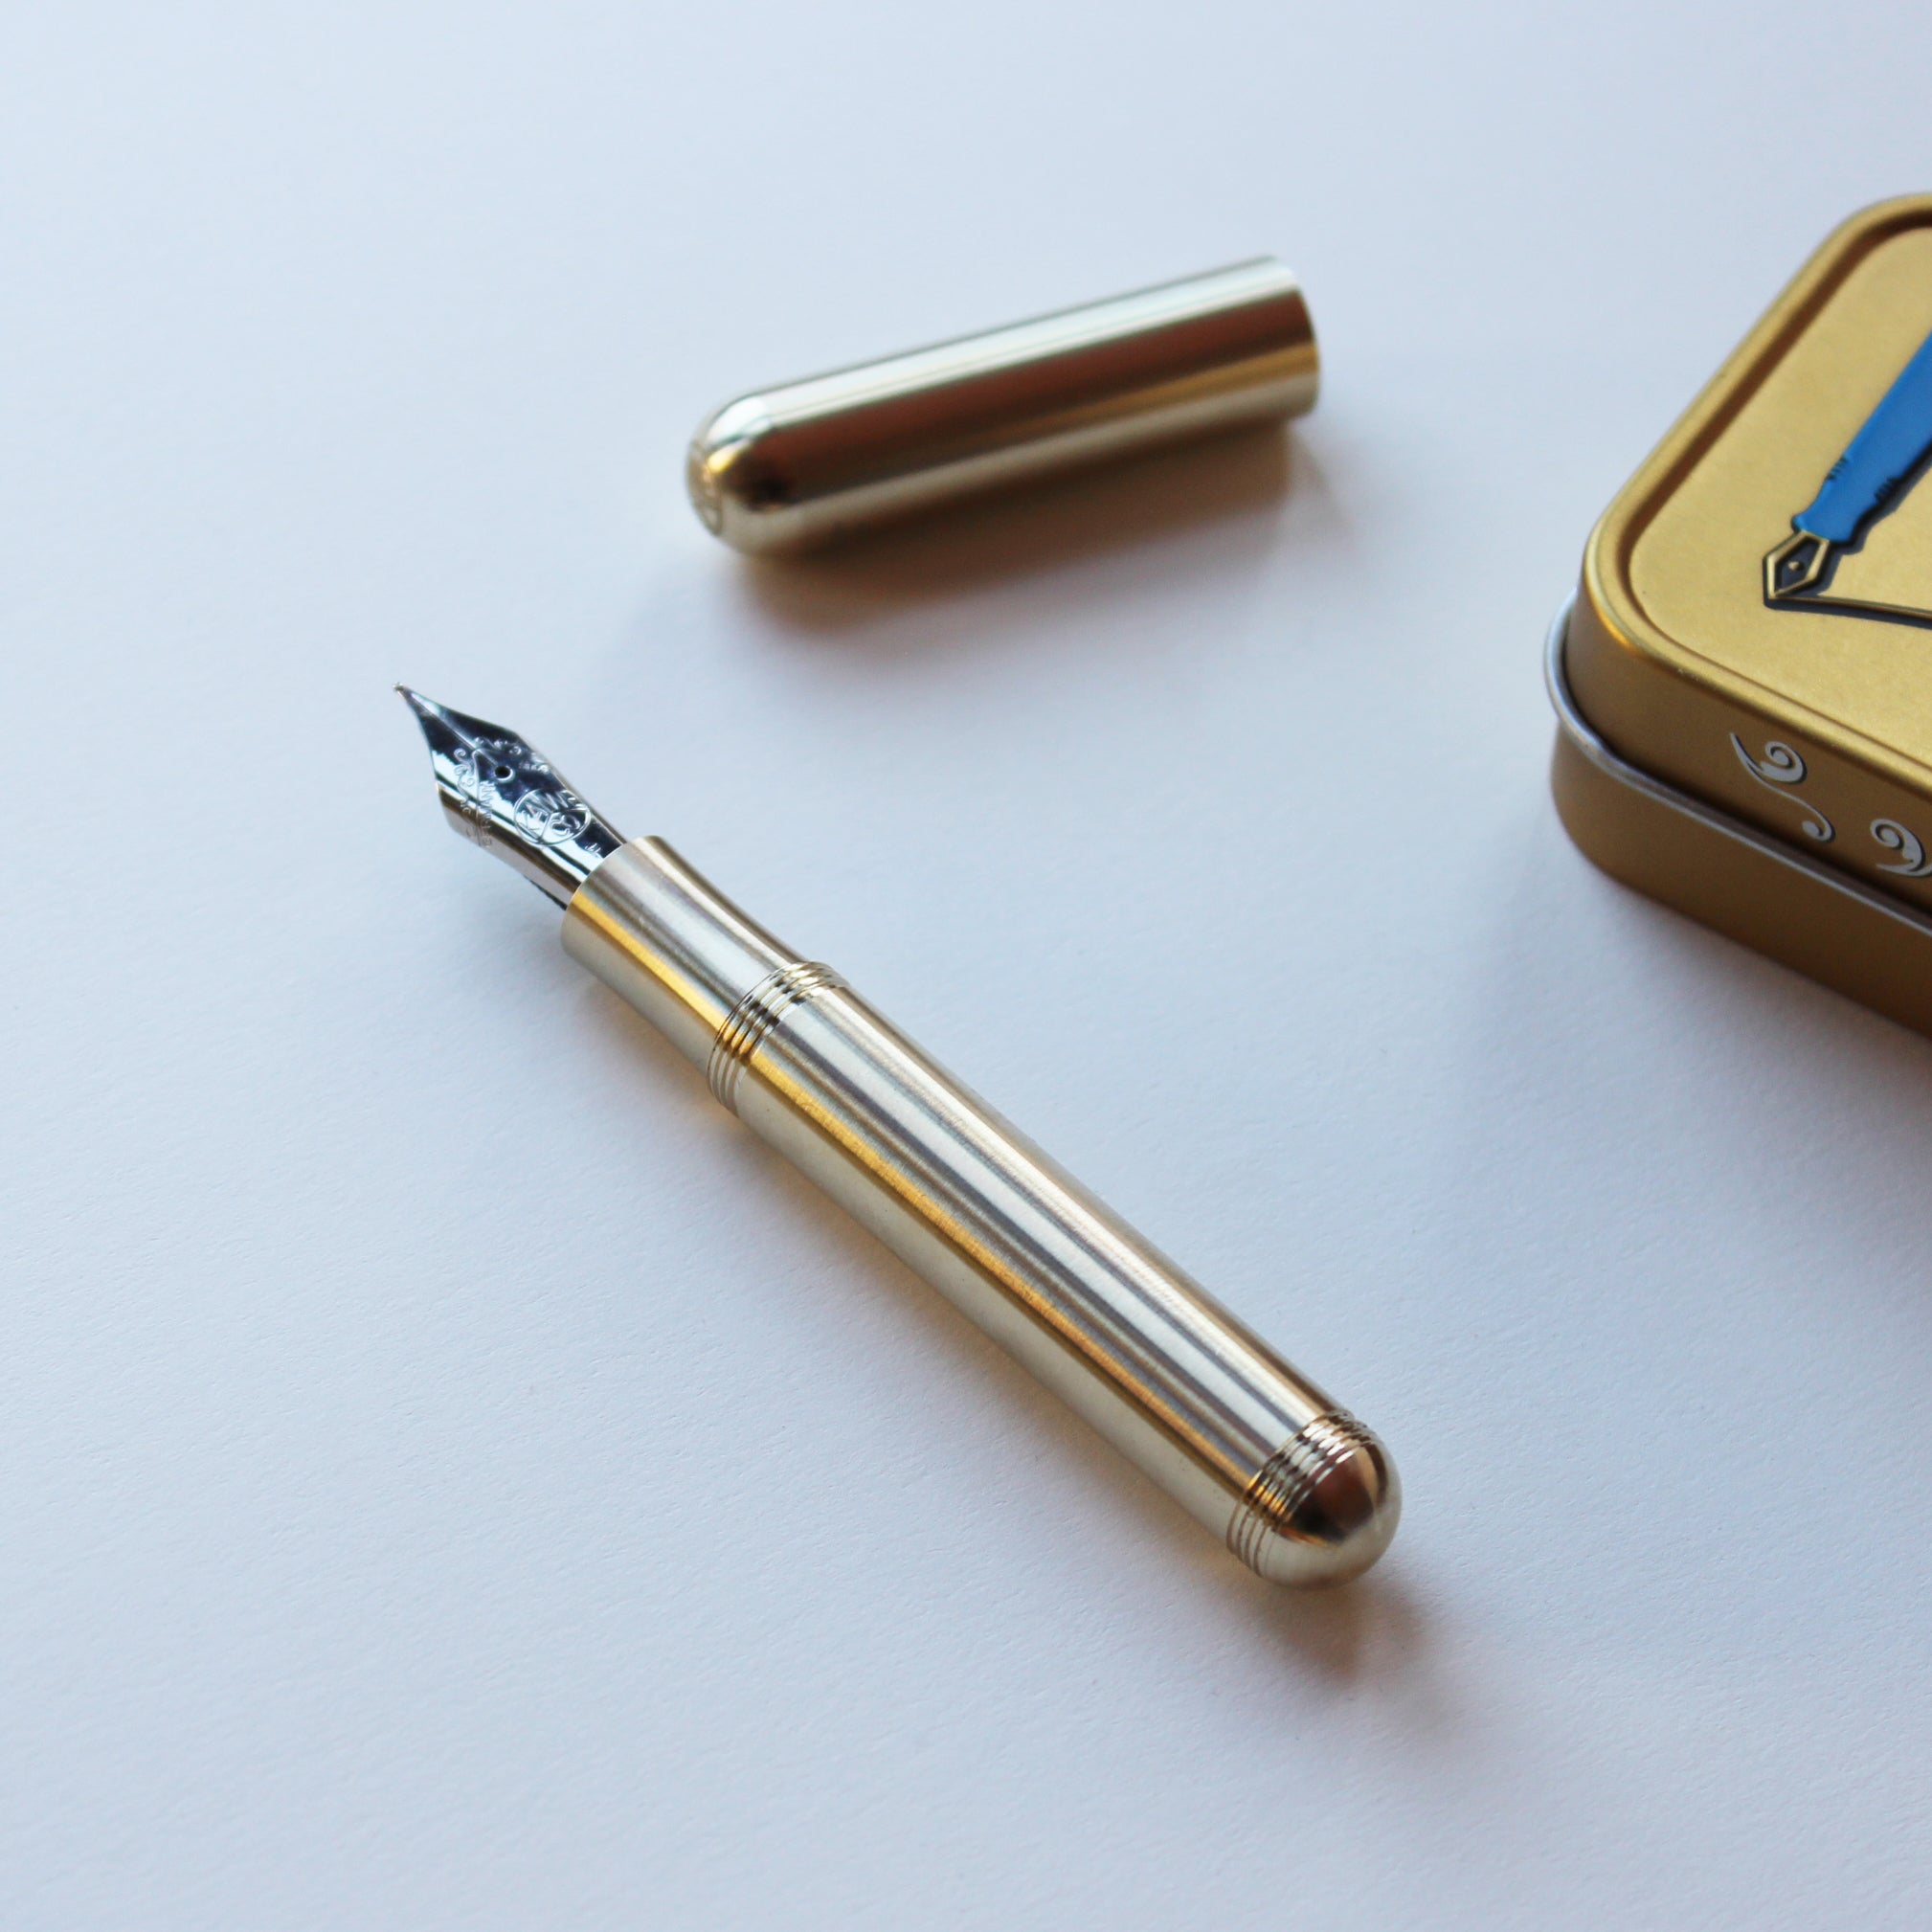 Kaweco Brass Supra Fountain Pen with cap and metal display tin to the side